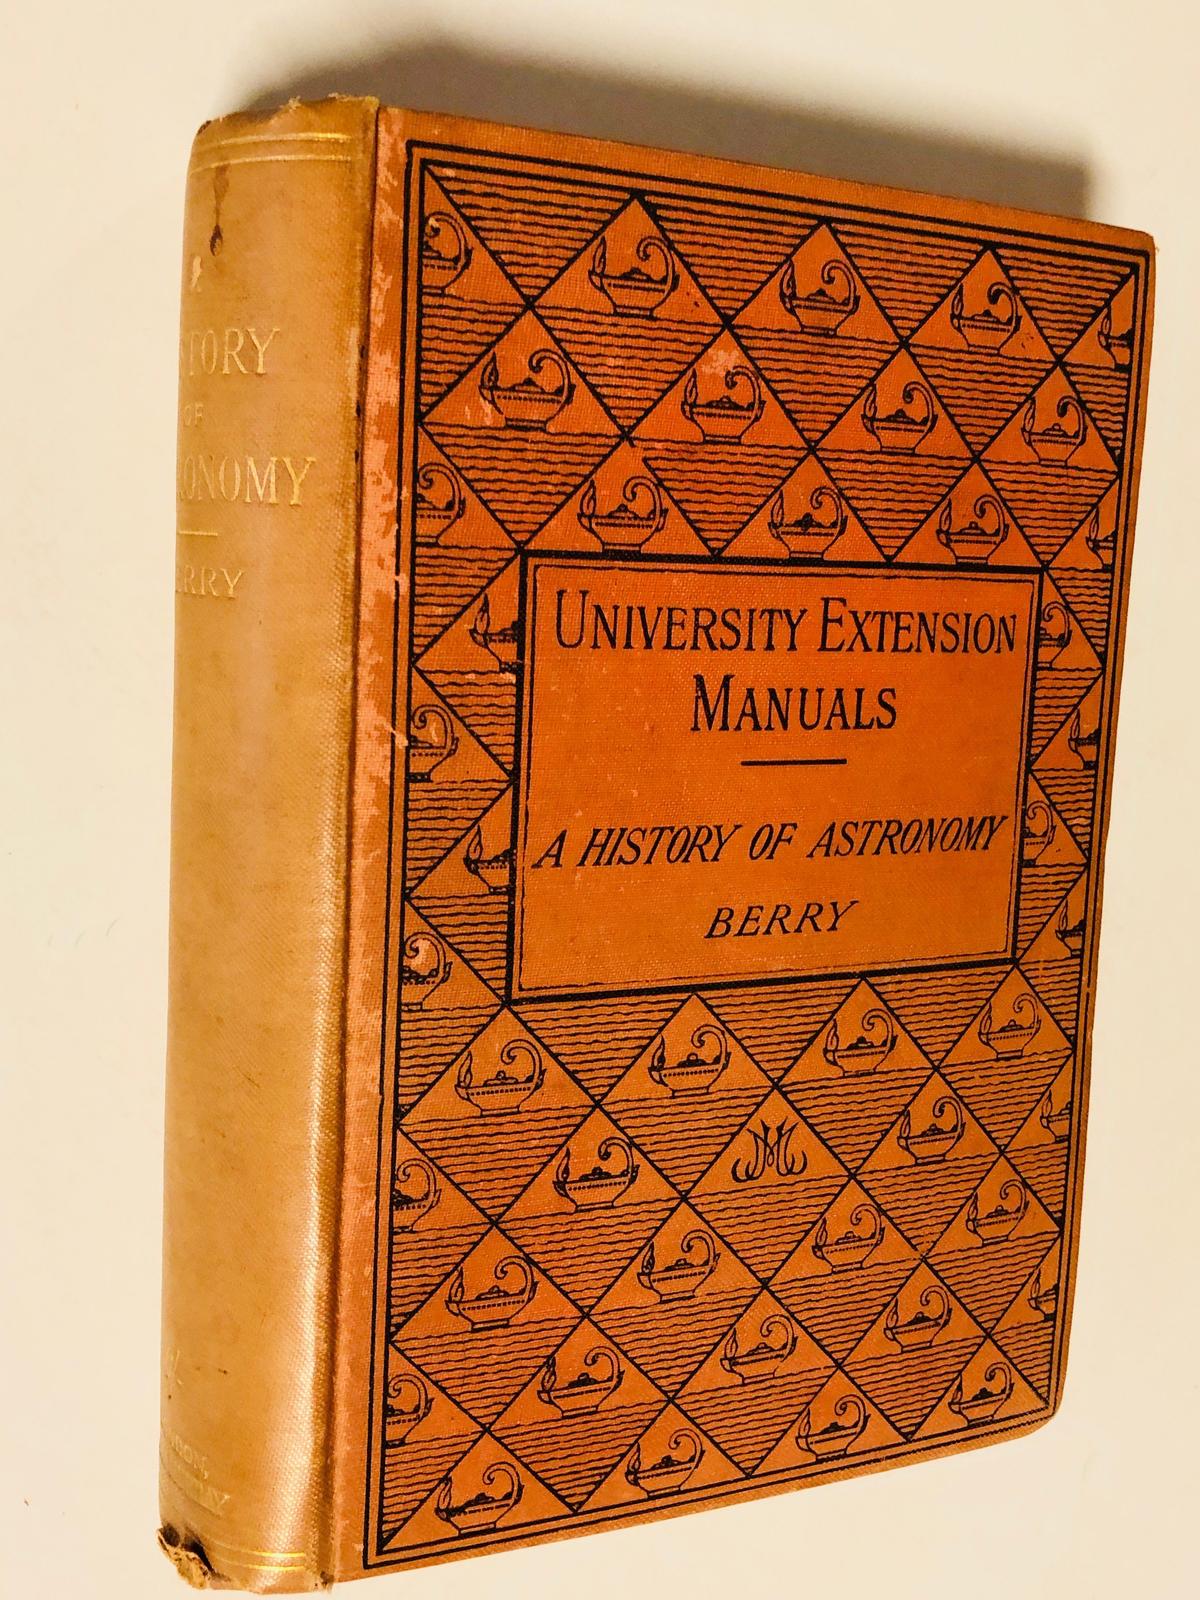 A Short History of Astronomy by Arthur Berry (1898)